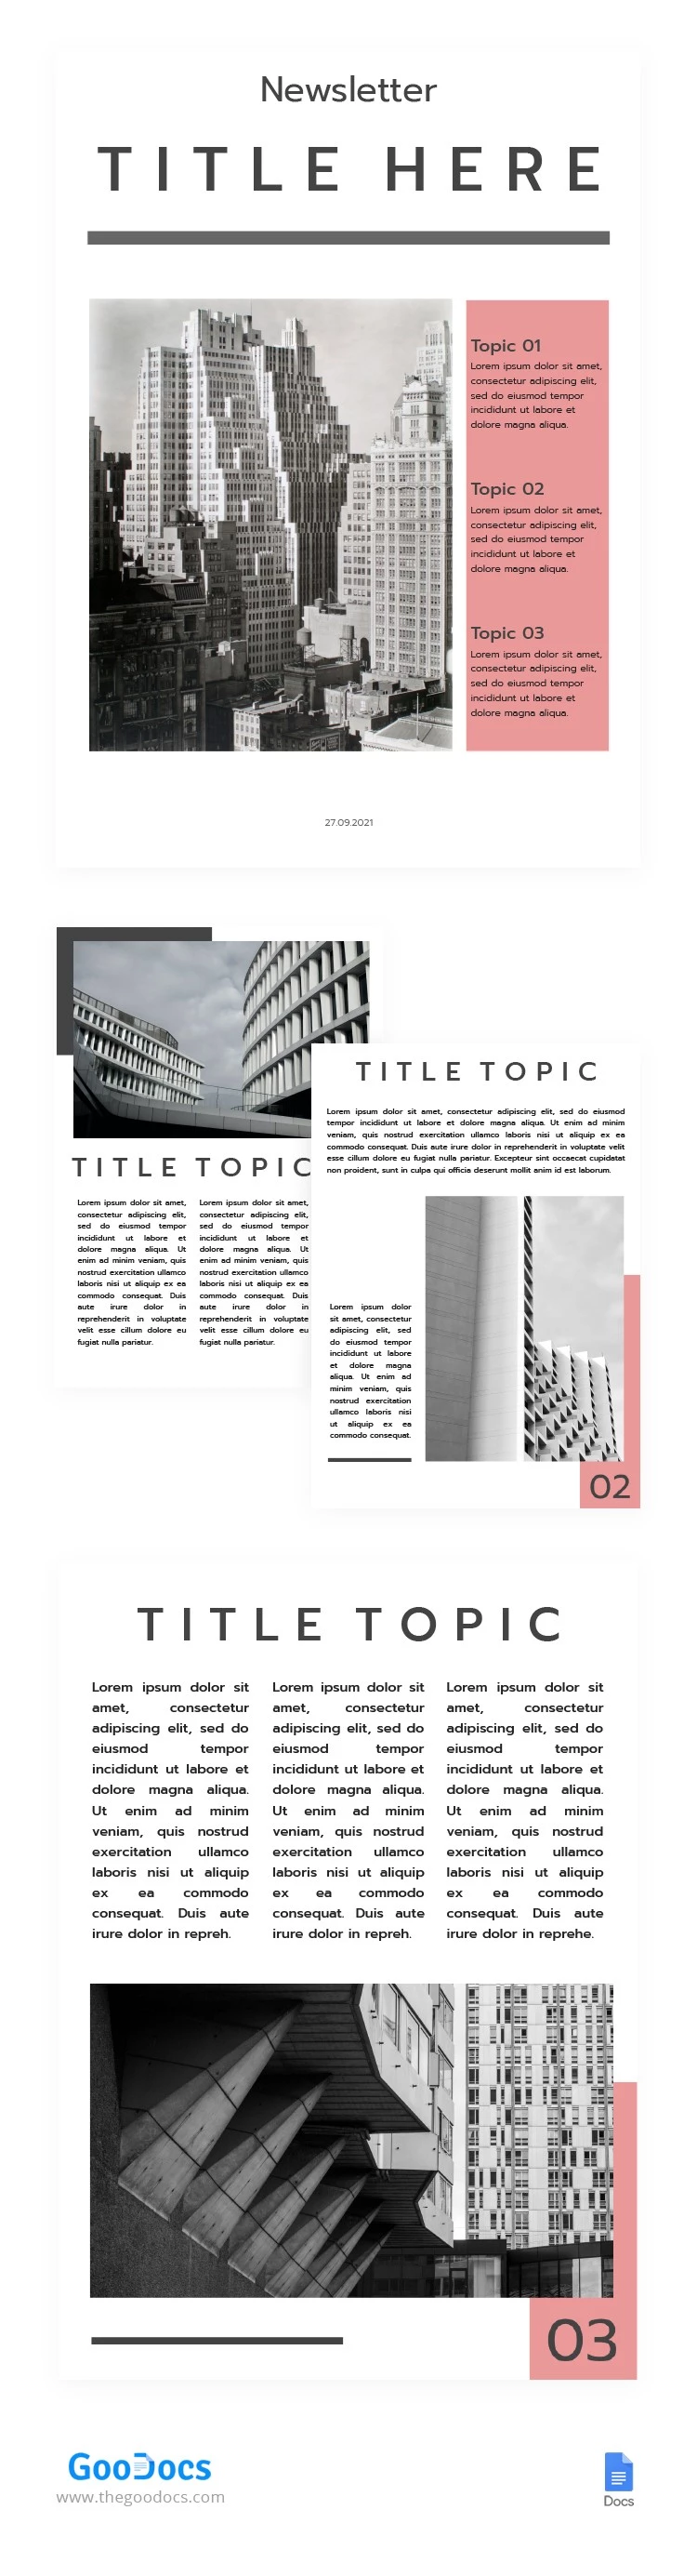 Black and Pink Newsletter - free Google Docs Template - 10062404